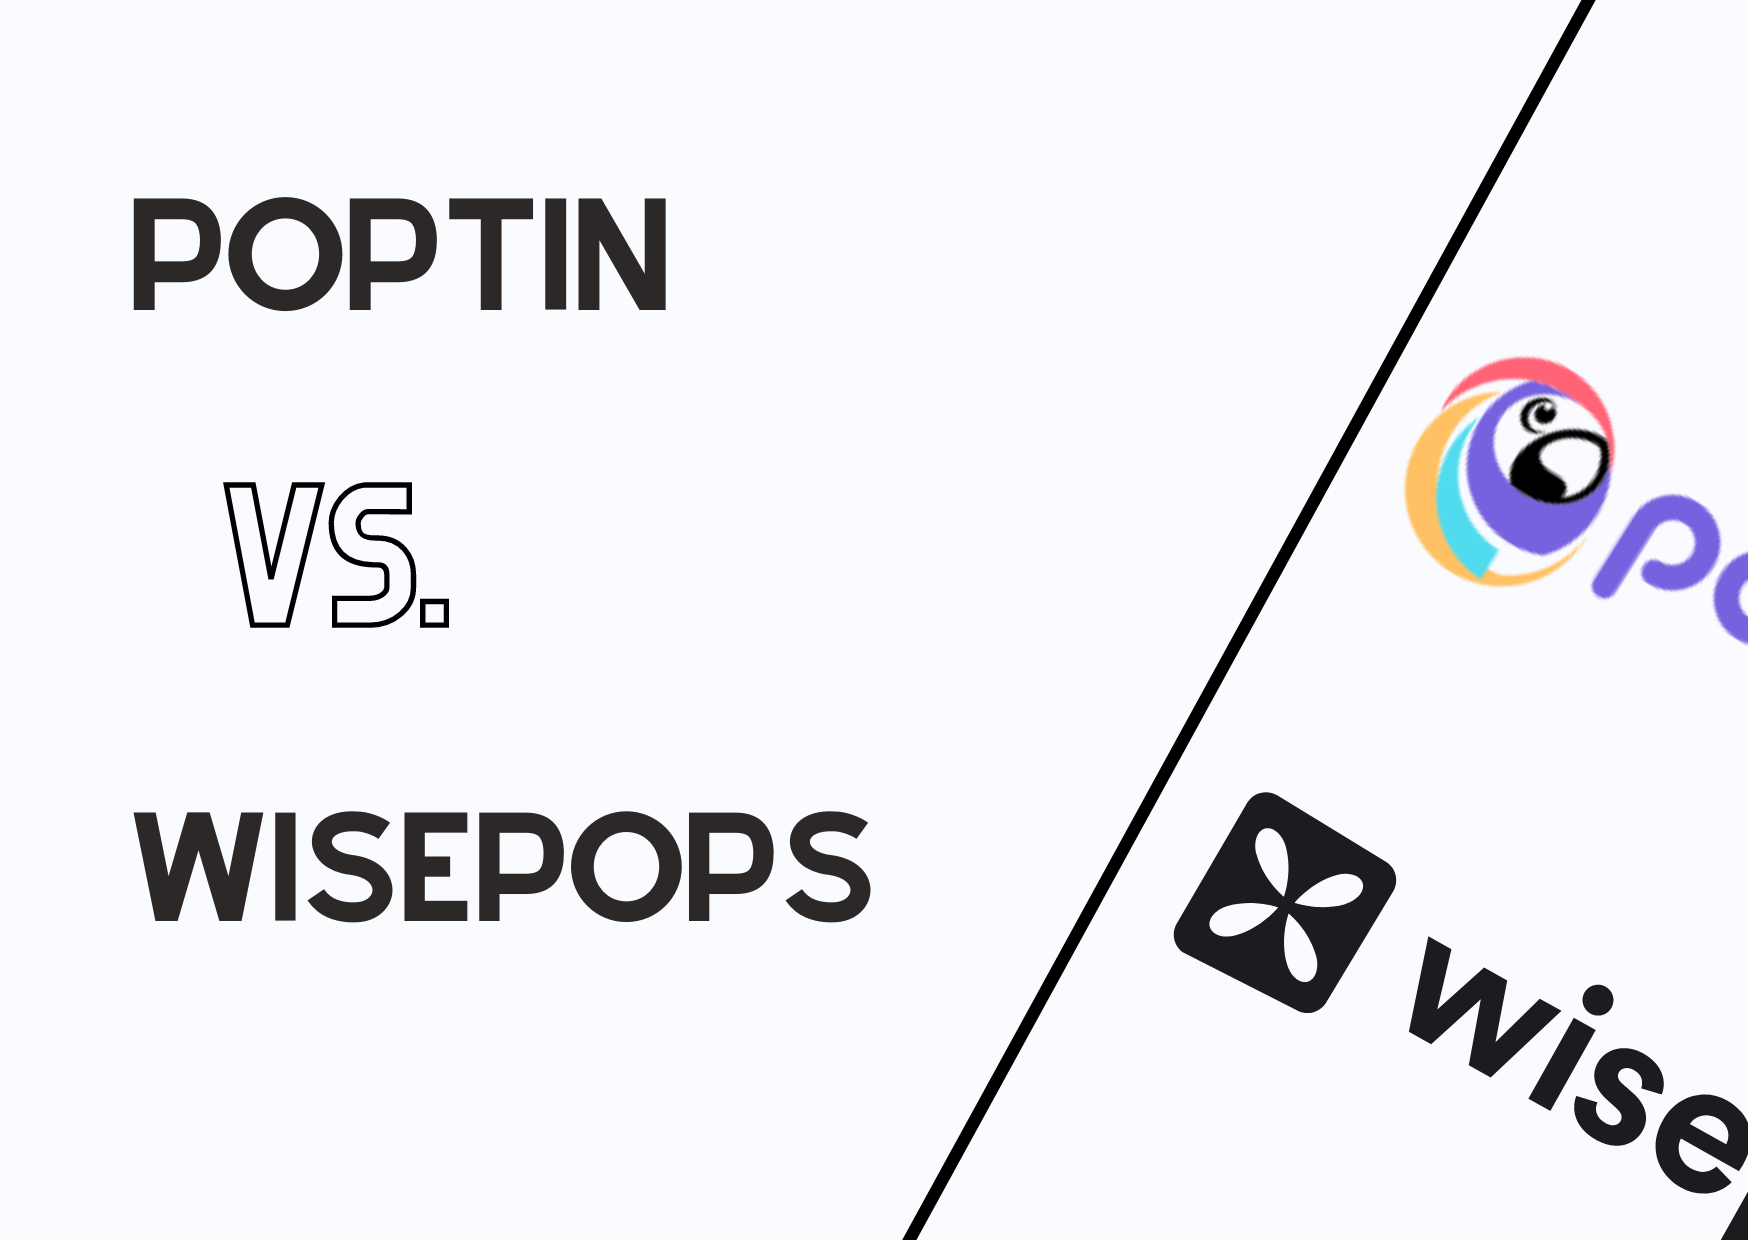 Poptin and Wisepops logos on the banner with a fair background